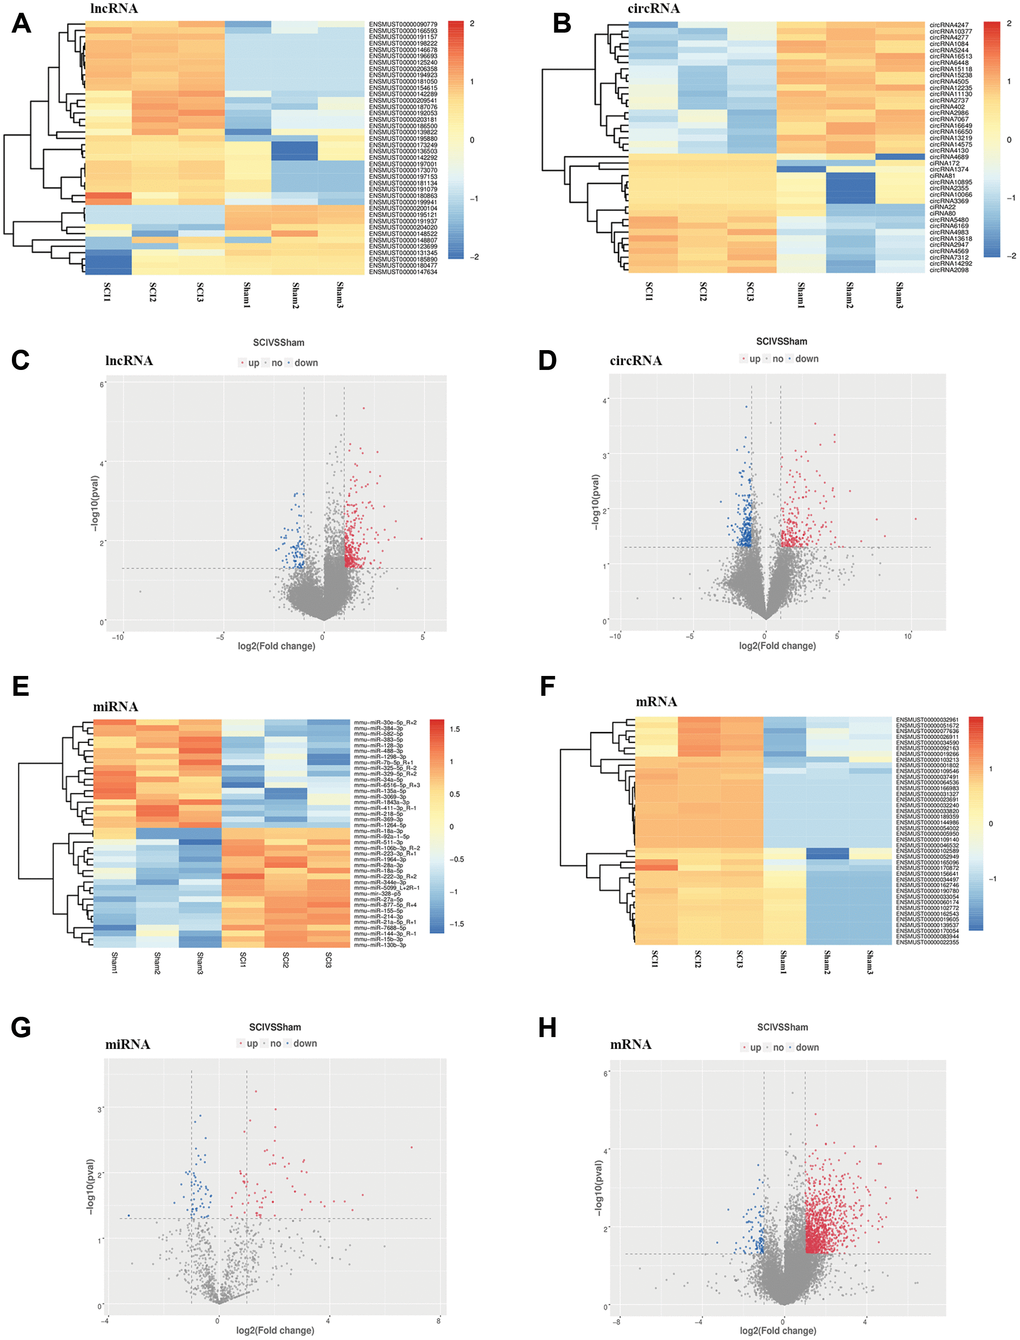 Expression profiles of DE ncRNAs and mRNAs in the lesion epicenter after SCI. (A) Heat map of DE lncRNAs in the SCI group compared with the sham group. (B) Heat map of DE circRNAs. (C) Volcano plot indicating the differential expression of lncRNAs. (D) Volcano plot of circRNAs. (E) Heat map of DE miRNAs. (G) Volcano plot of miRNAs. (F) Heat map of DE mRNAs. (H) Volcano plot of mRNAs. Up-regulated and down-regulated genes are colored in red and blue, respectively.